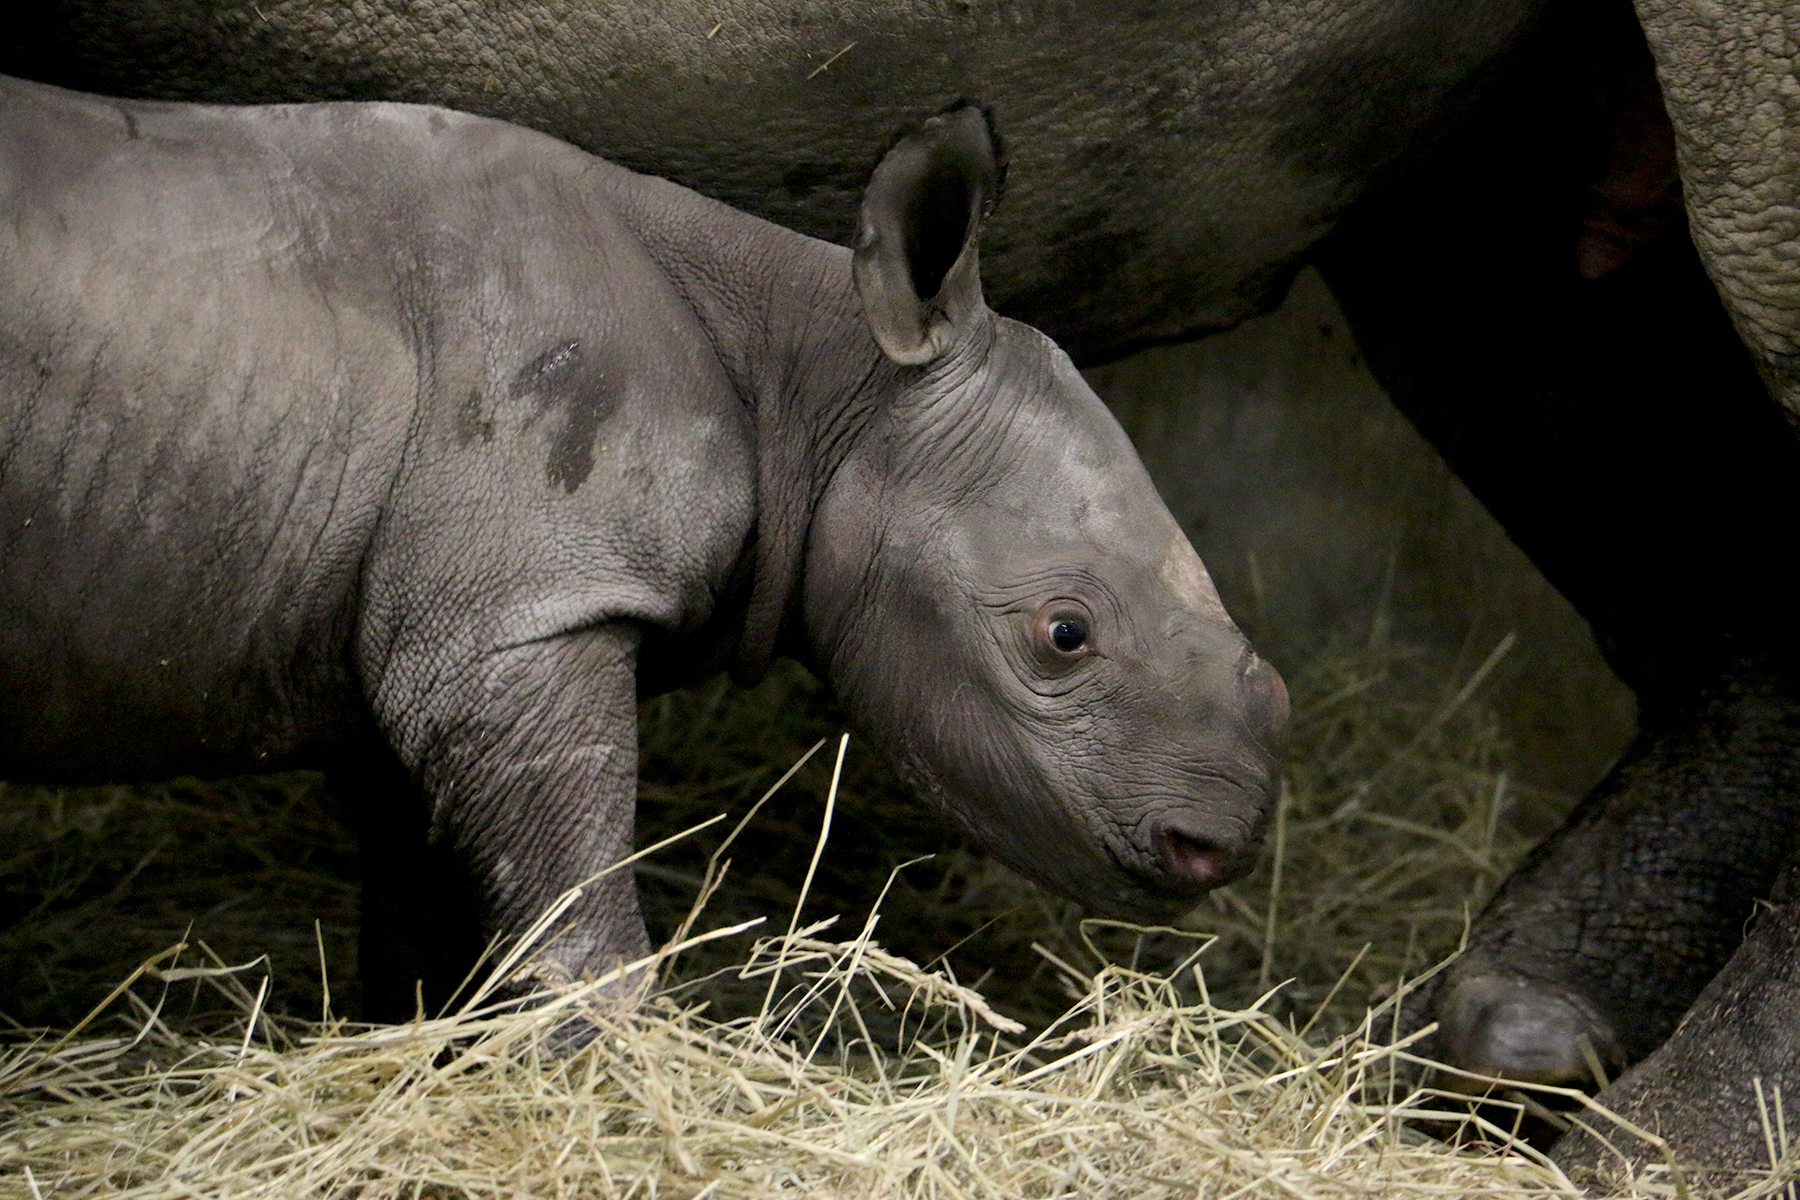 PHOTO: The Blank Park Zoo in Des Moines, Iowa welcomed a new baby rhino who was born on Oct. 11, 2016.